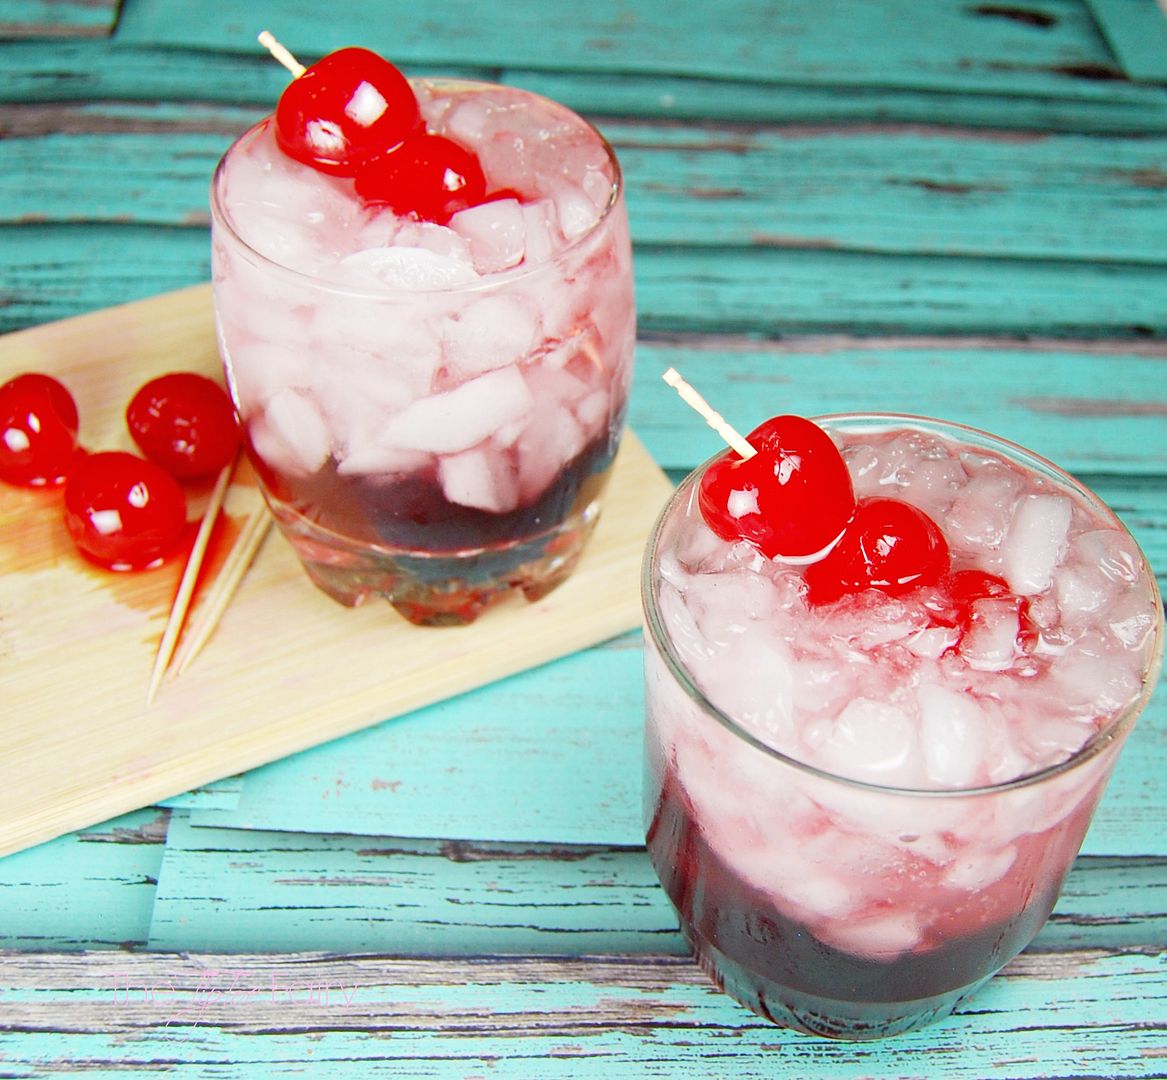 Cherry Bomb Skinny Cocktail - A grown up kinda Shirley Temple drink perfect for Valentine's Day with your sweetie.  With homemade skinny grenadine and limeade vodka! Learn how to make your own Grenadine! It's so easy! | The TipToe Fairy #drinks #cocktails